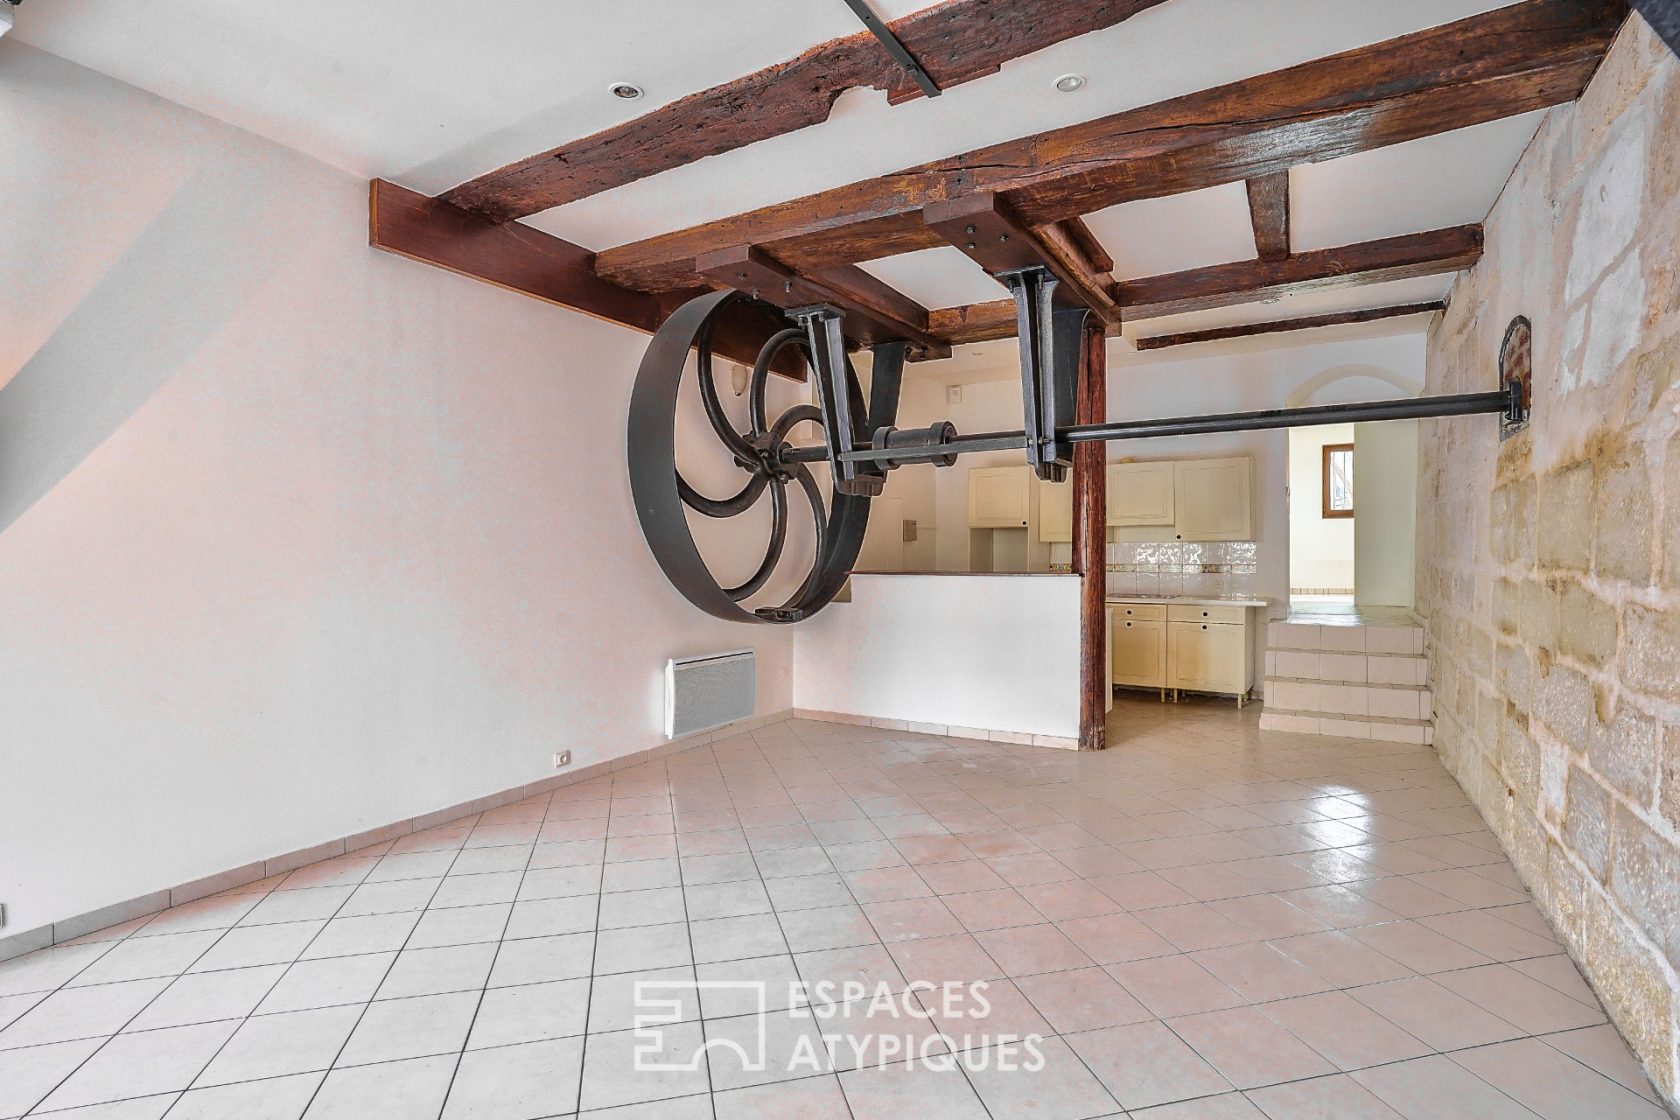 Apartment in an old mill dating from the 13th century